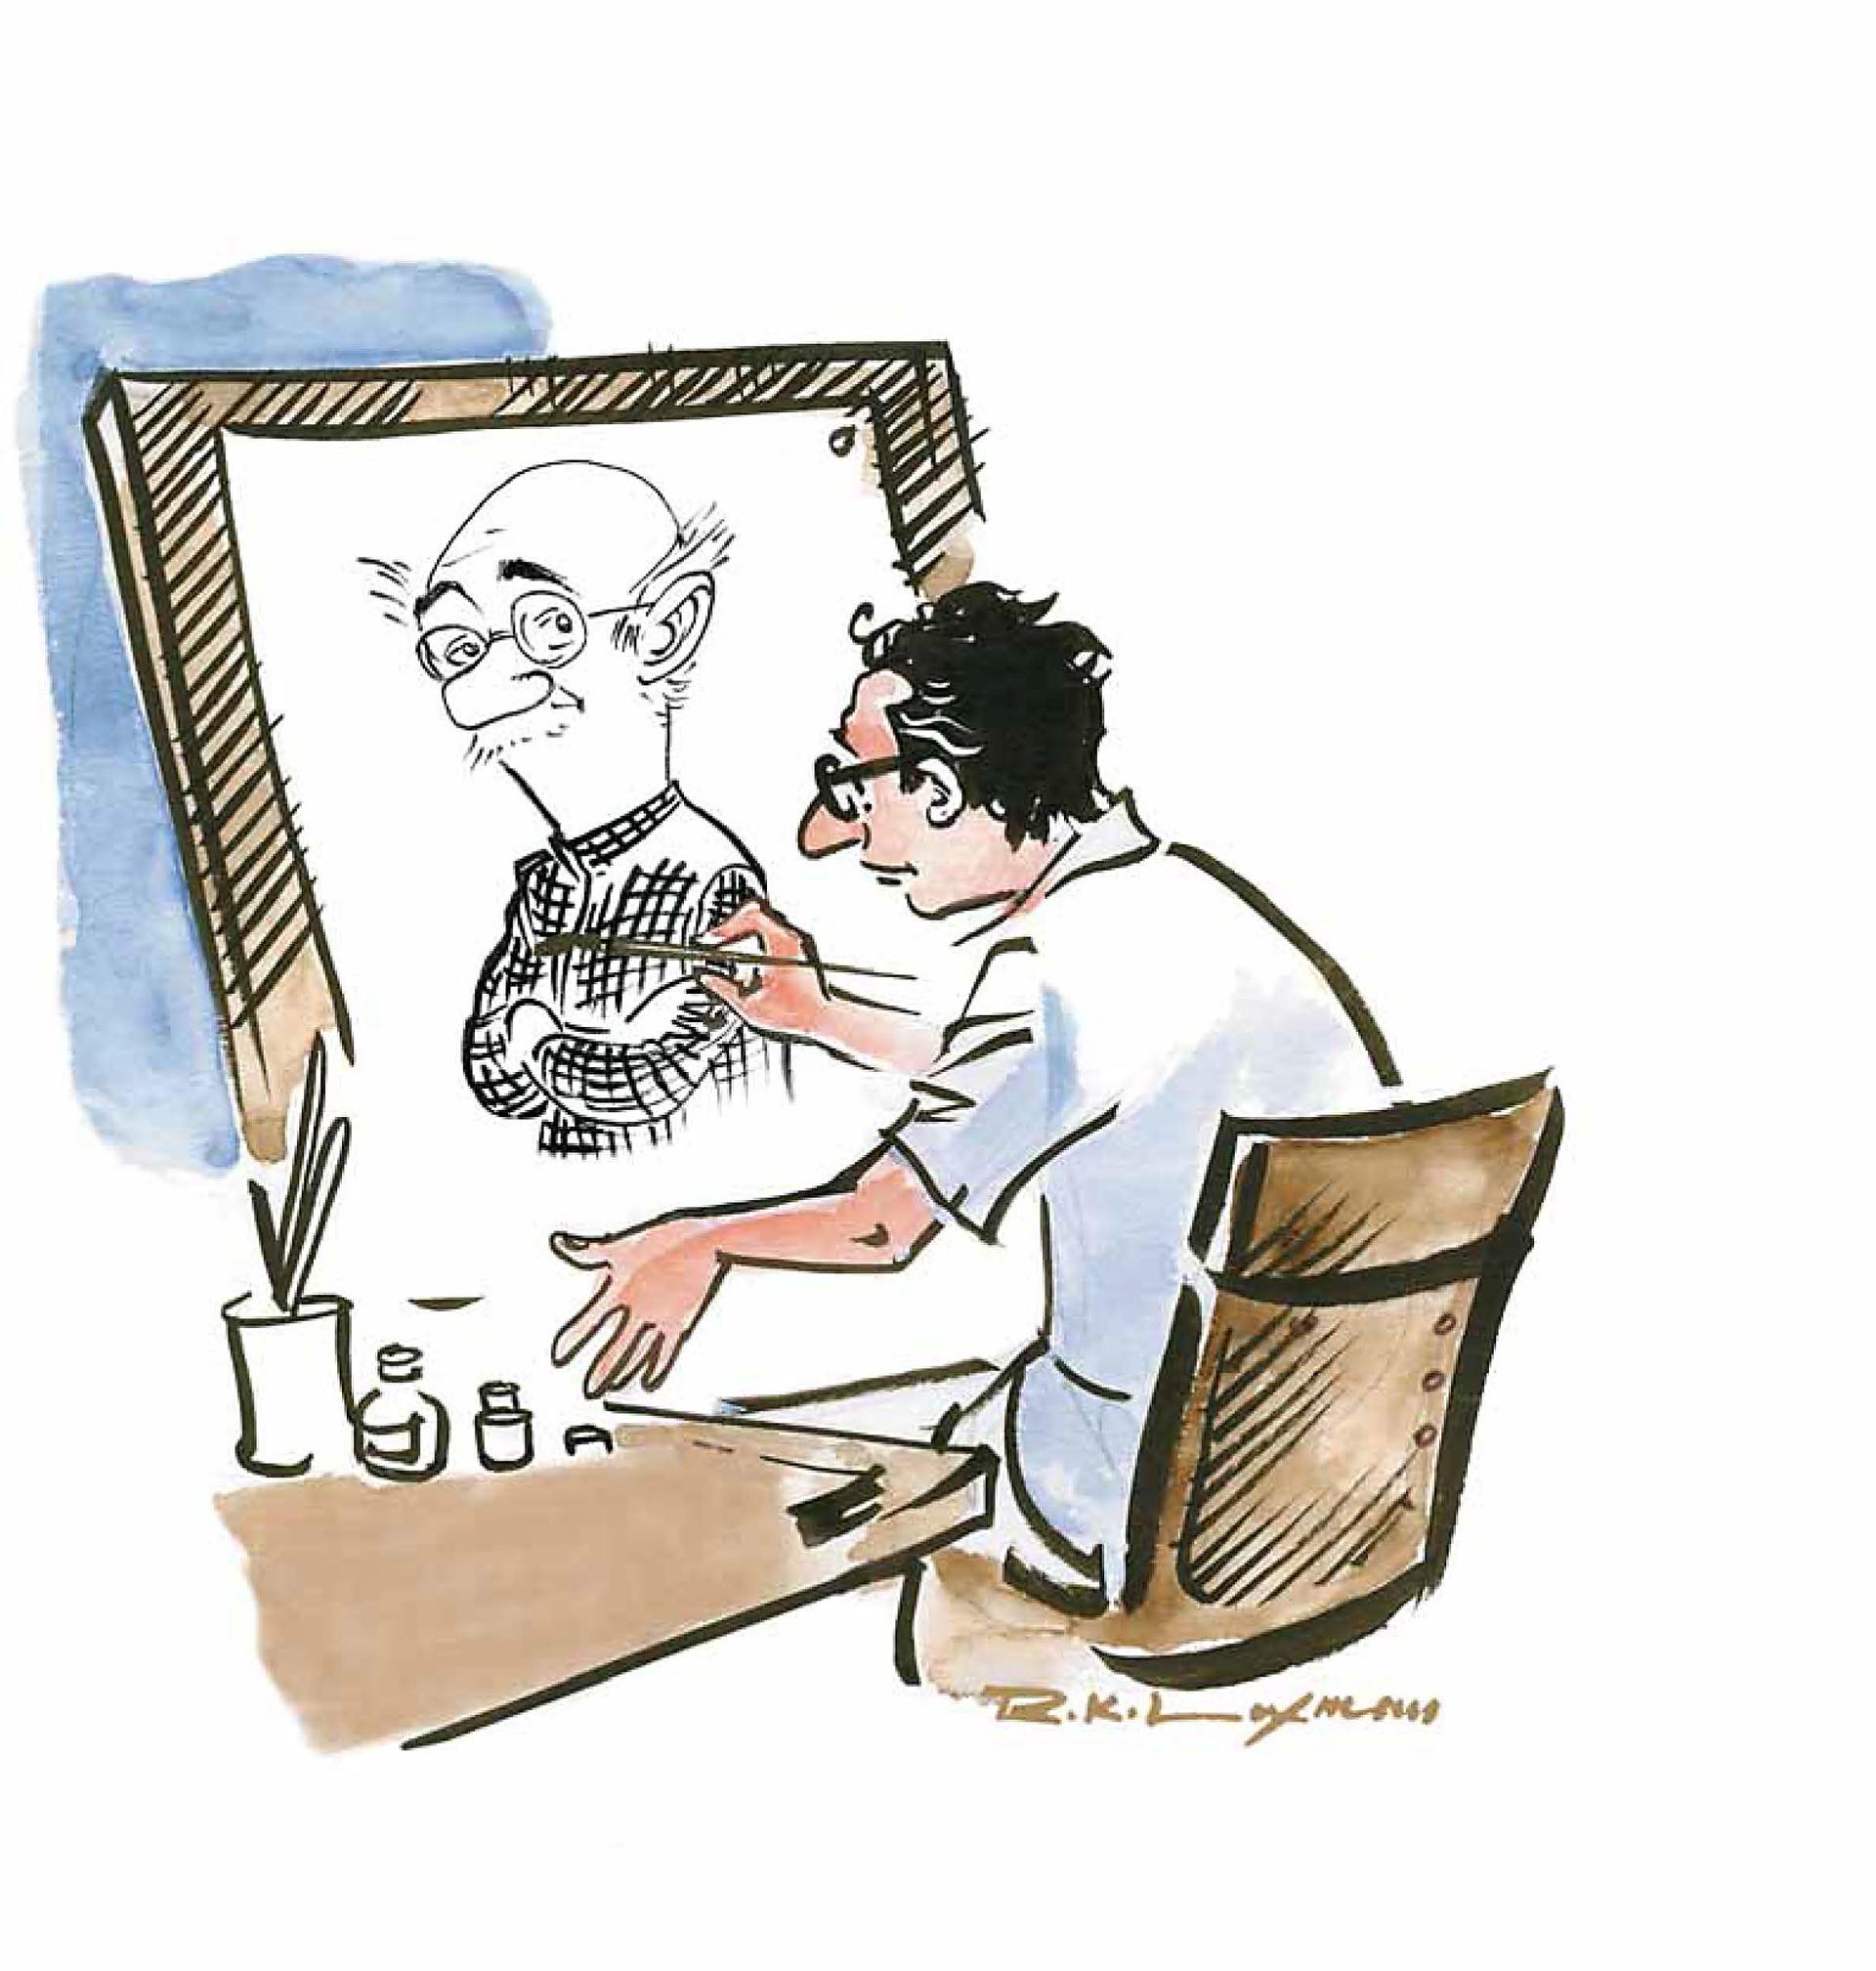 Indian cartoonist R.K. Laxman draws himself drawing his iconic character, The Common Man. Laxman 's political cartoons cover India's first 60 years of independence.